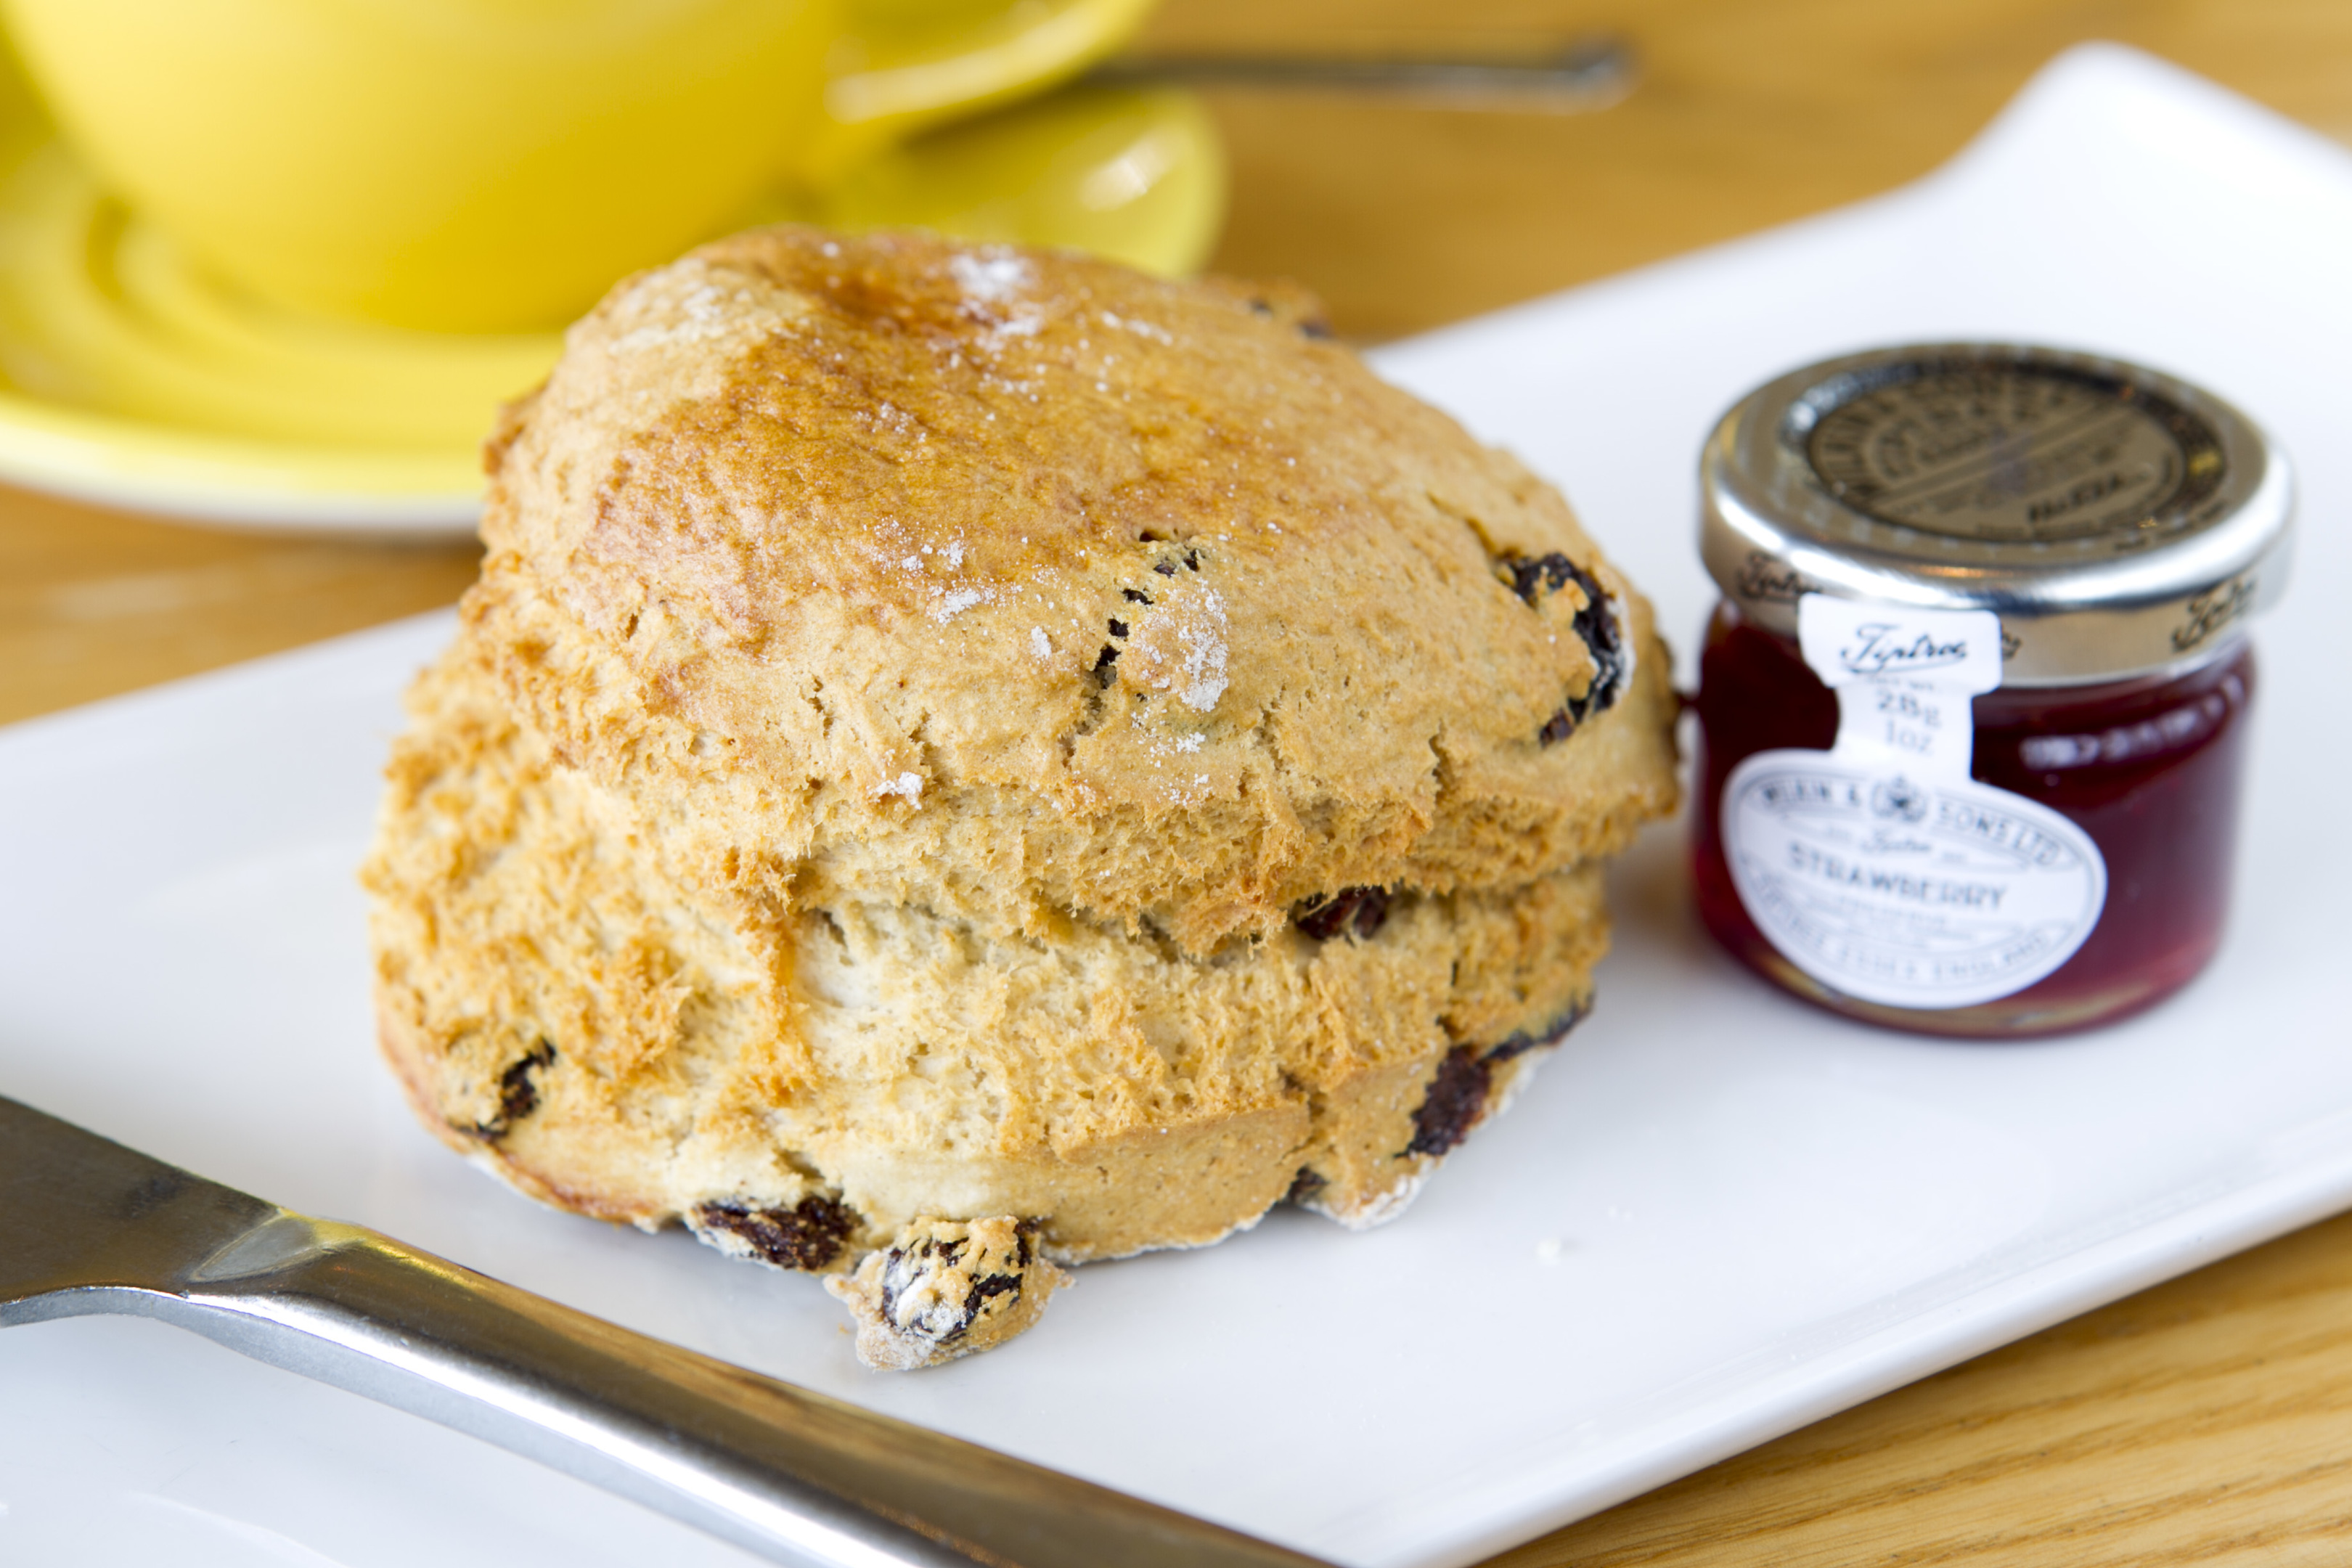 The delicious fruit scone at Glendoick (Andrew Cawley / DC Thomson)